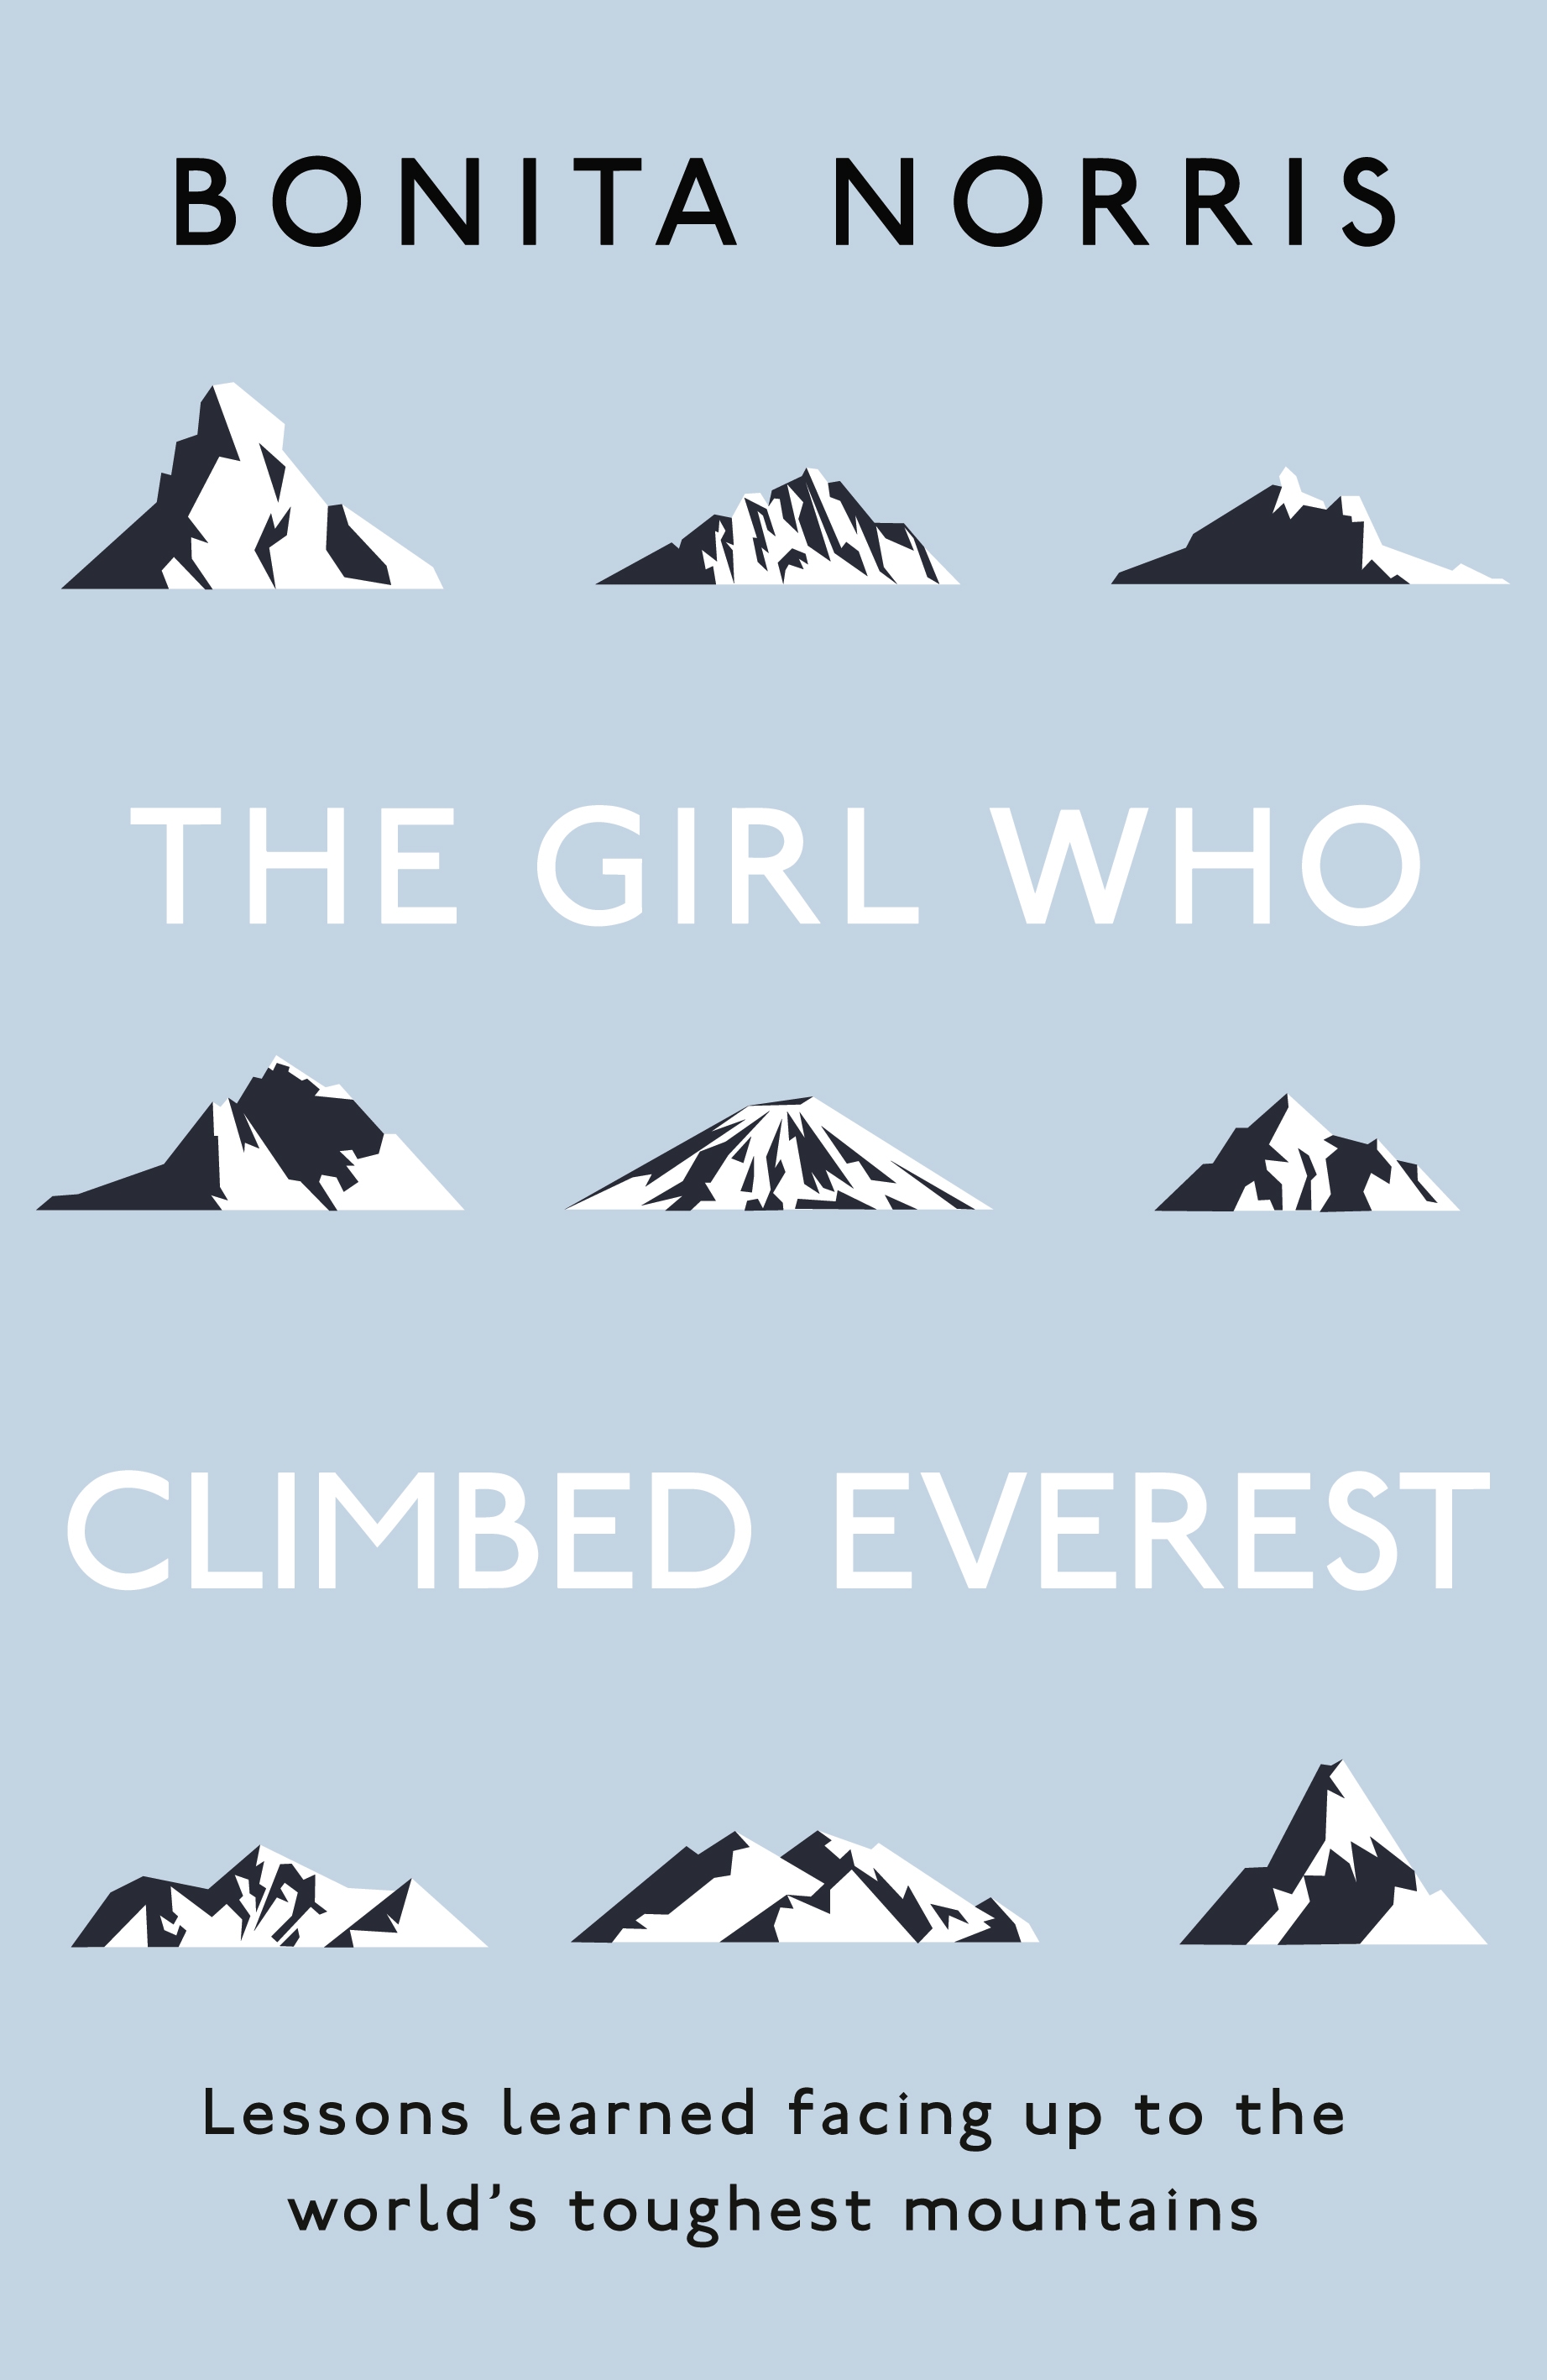 The Girl Who Climbed Everest by Bonita Norris — The Boardman Tasker Prize for Literature